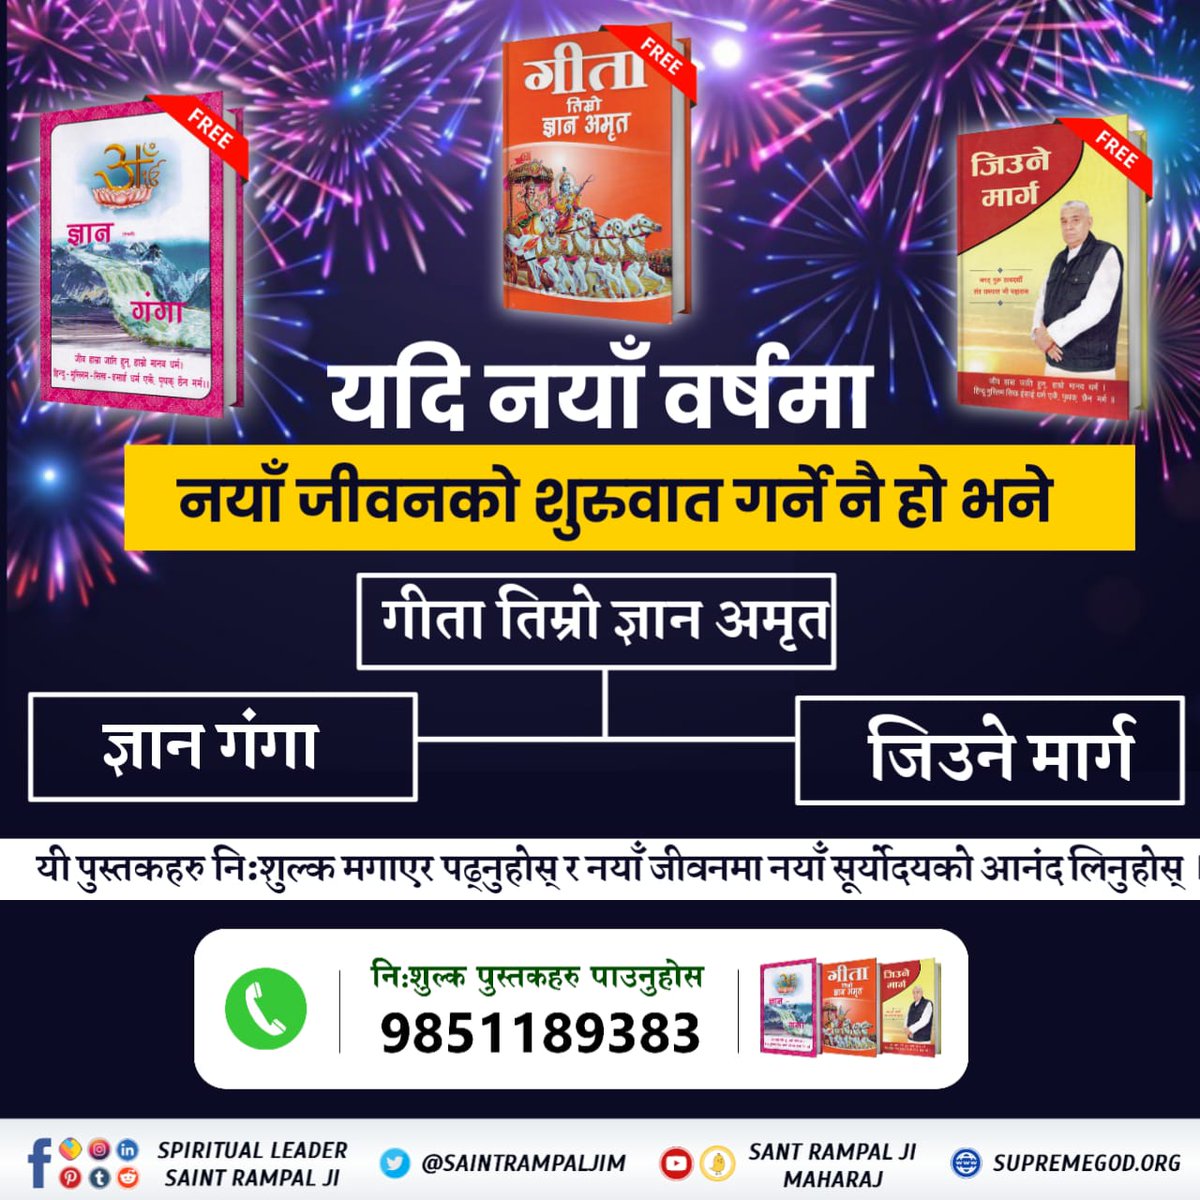 #नयाँवर्षमा_जीवनको_नयाँयात्रा If you want to start a new life in the new year, then read the books 'Gita Timro Gyan Amrit', 'Gyan Ganga' and 'Jiune Marg' (one book is free) and enjoy the new sunrise in the new life. #GodMorningMonday